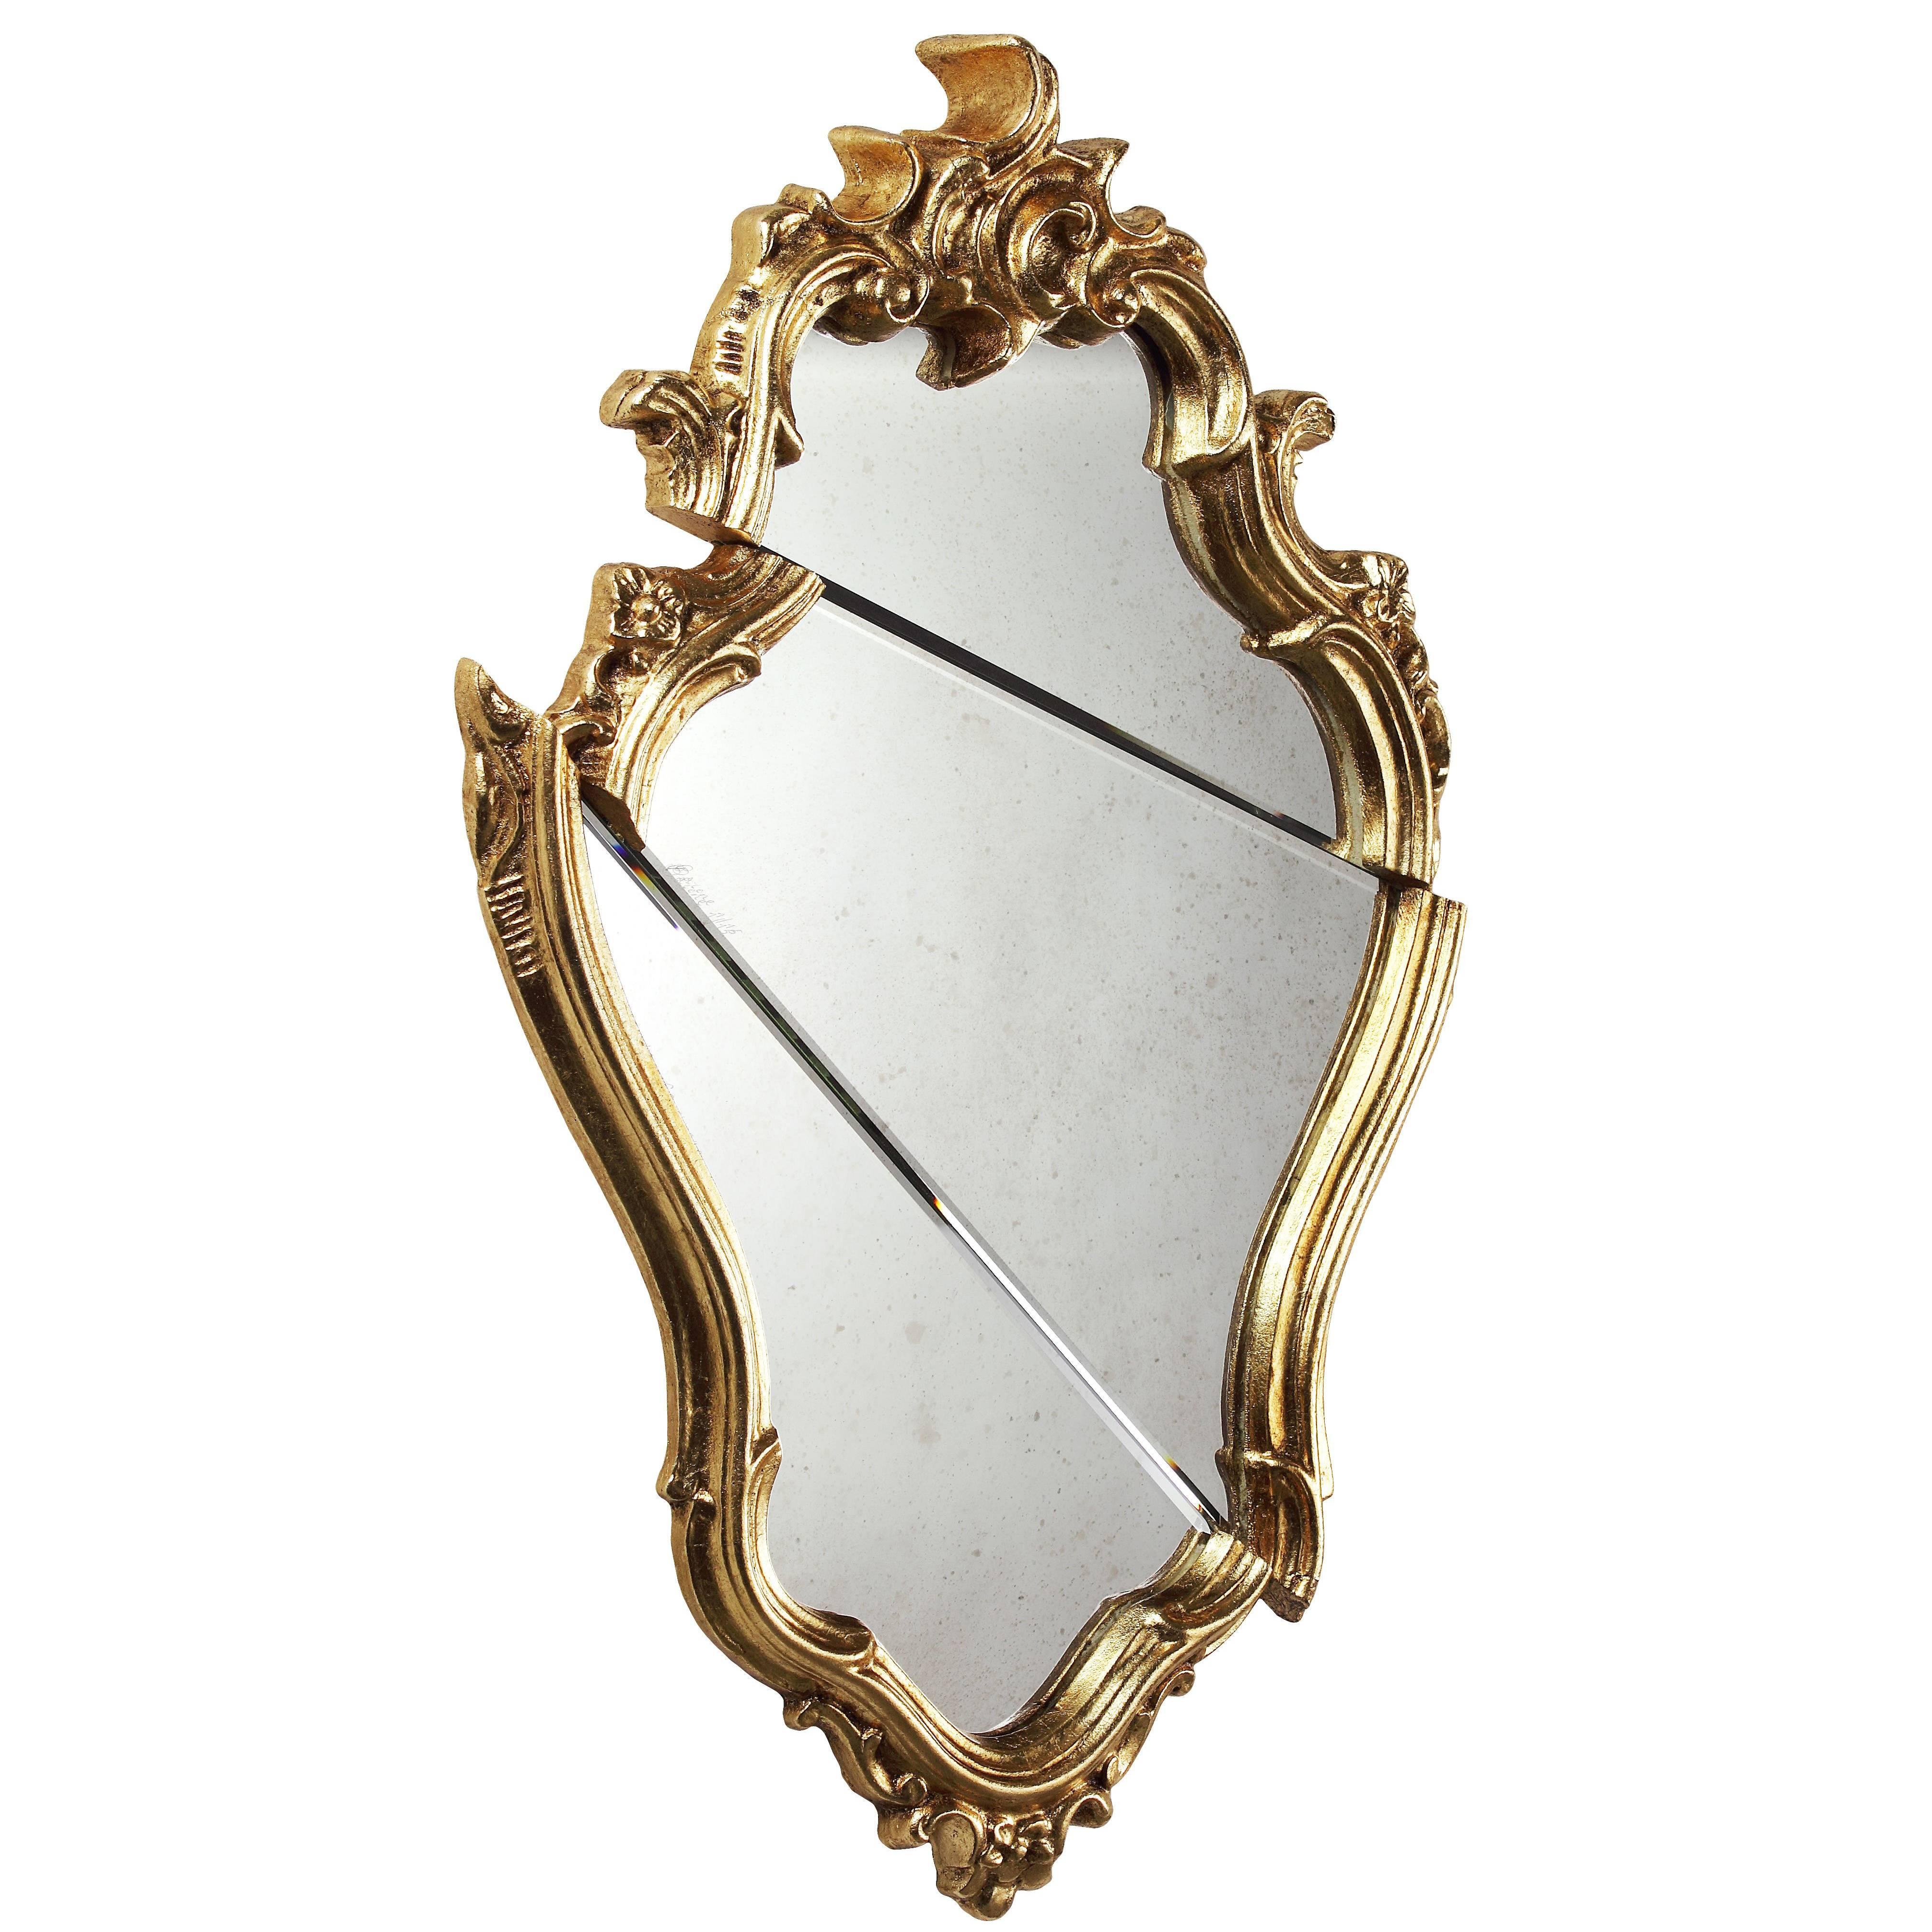 Decorative Wall Mirror Classic Frame Gold Baroque Contemporary Made in Italy For Sale